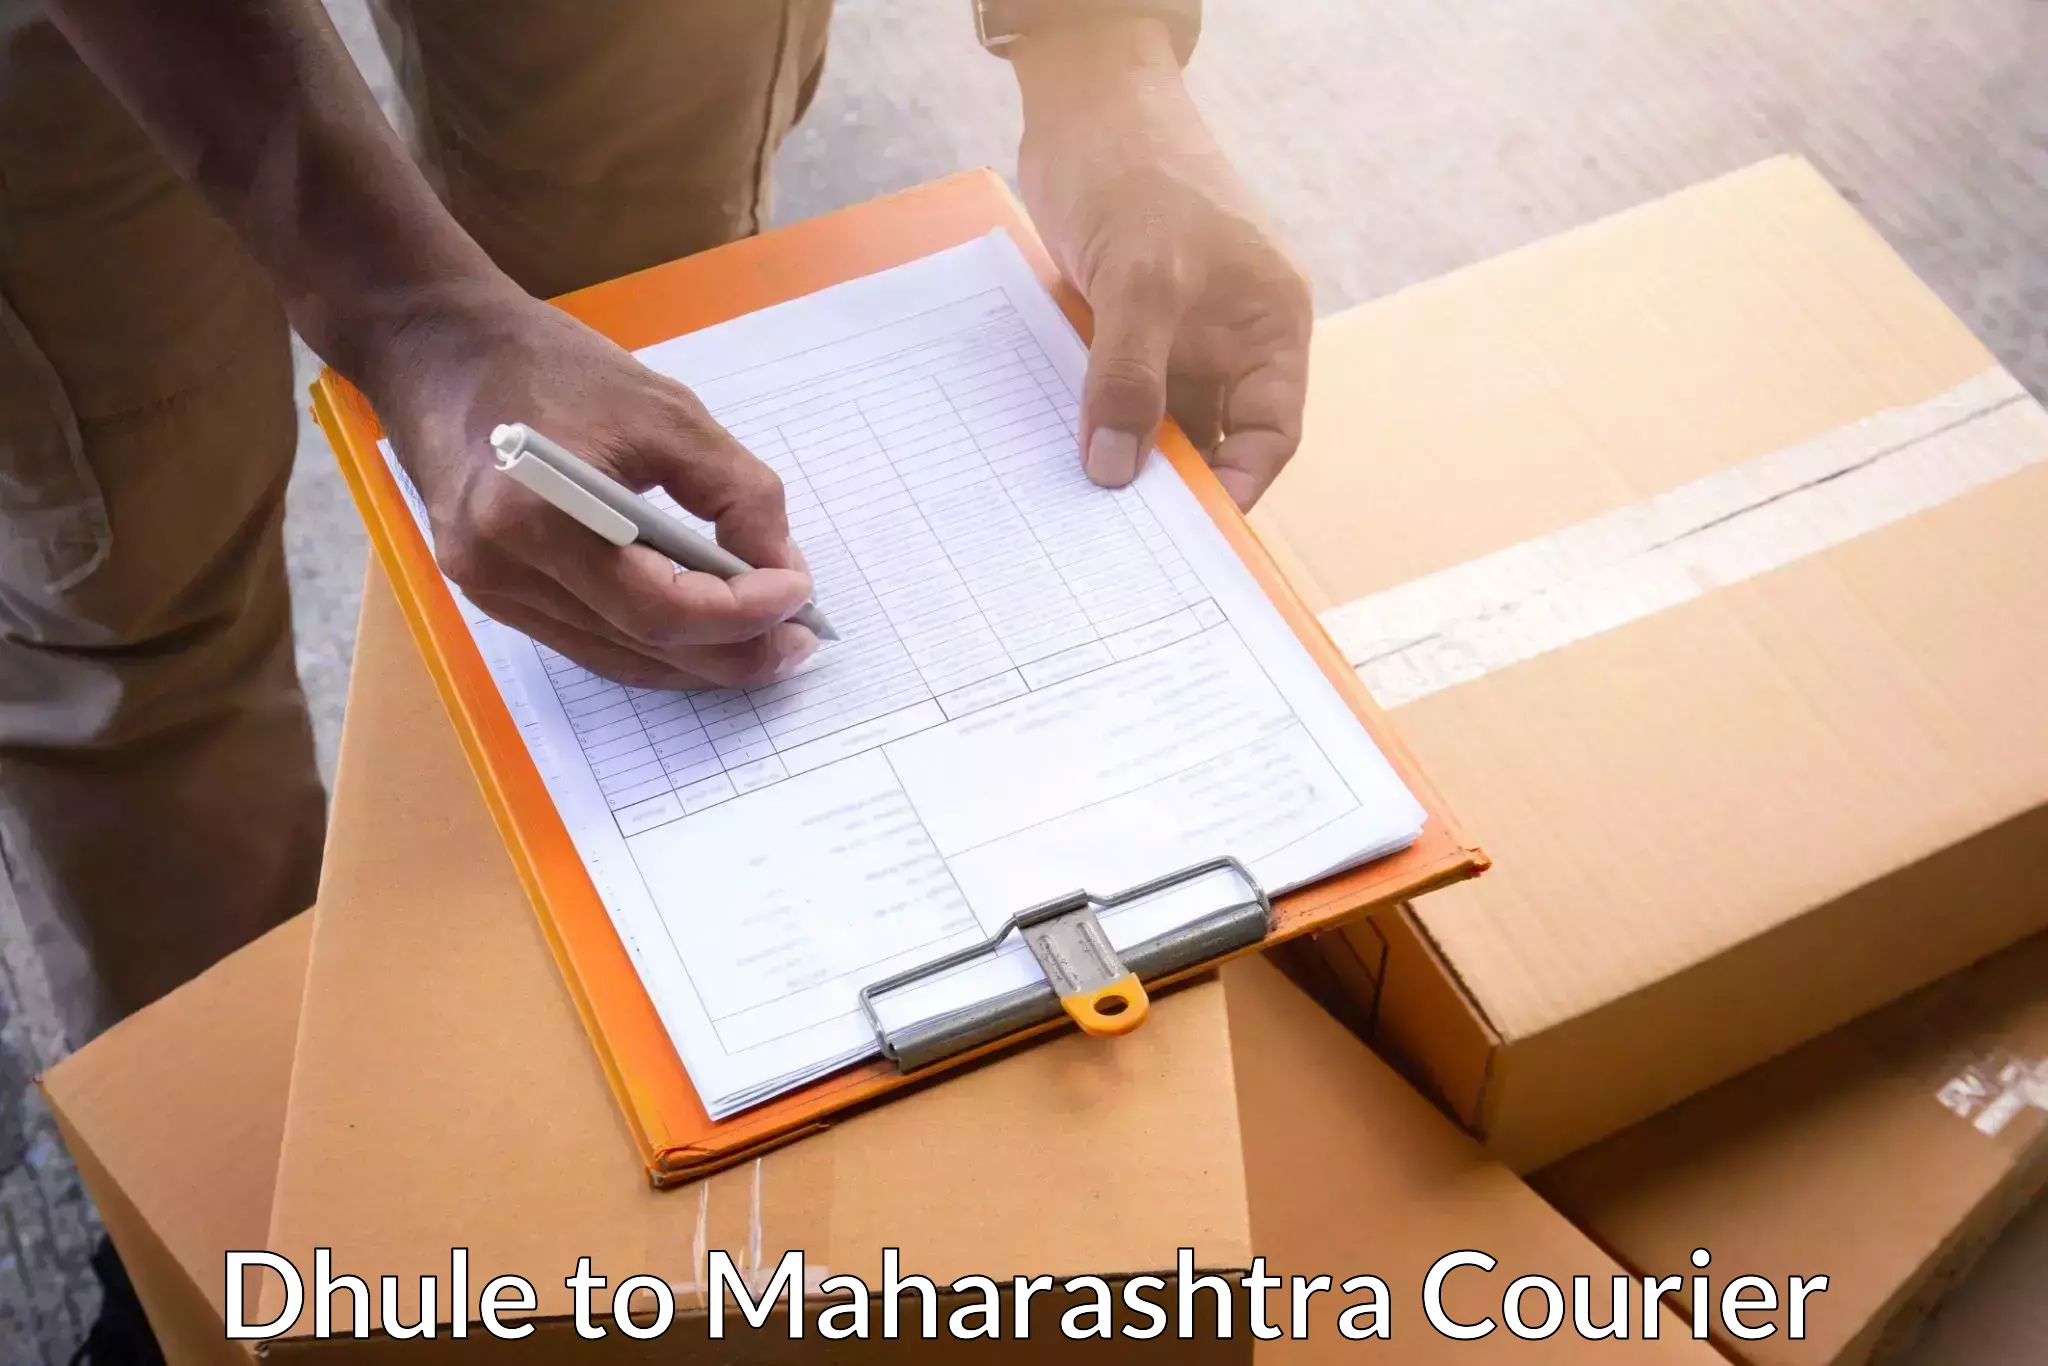 Efficient order fulfillment in Dhule to Akot